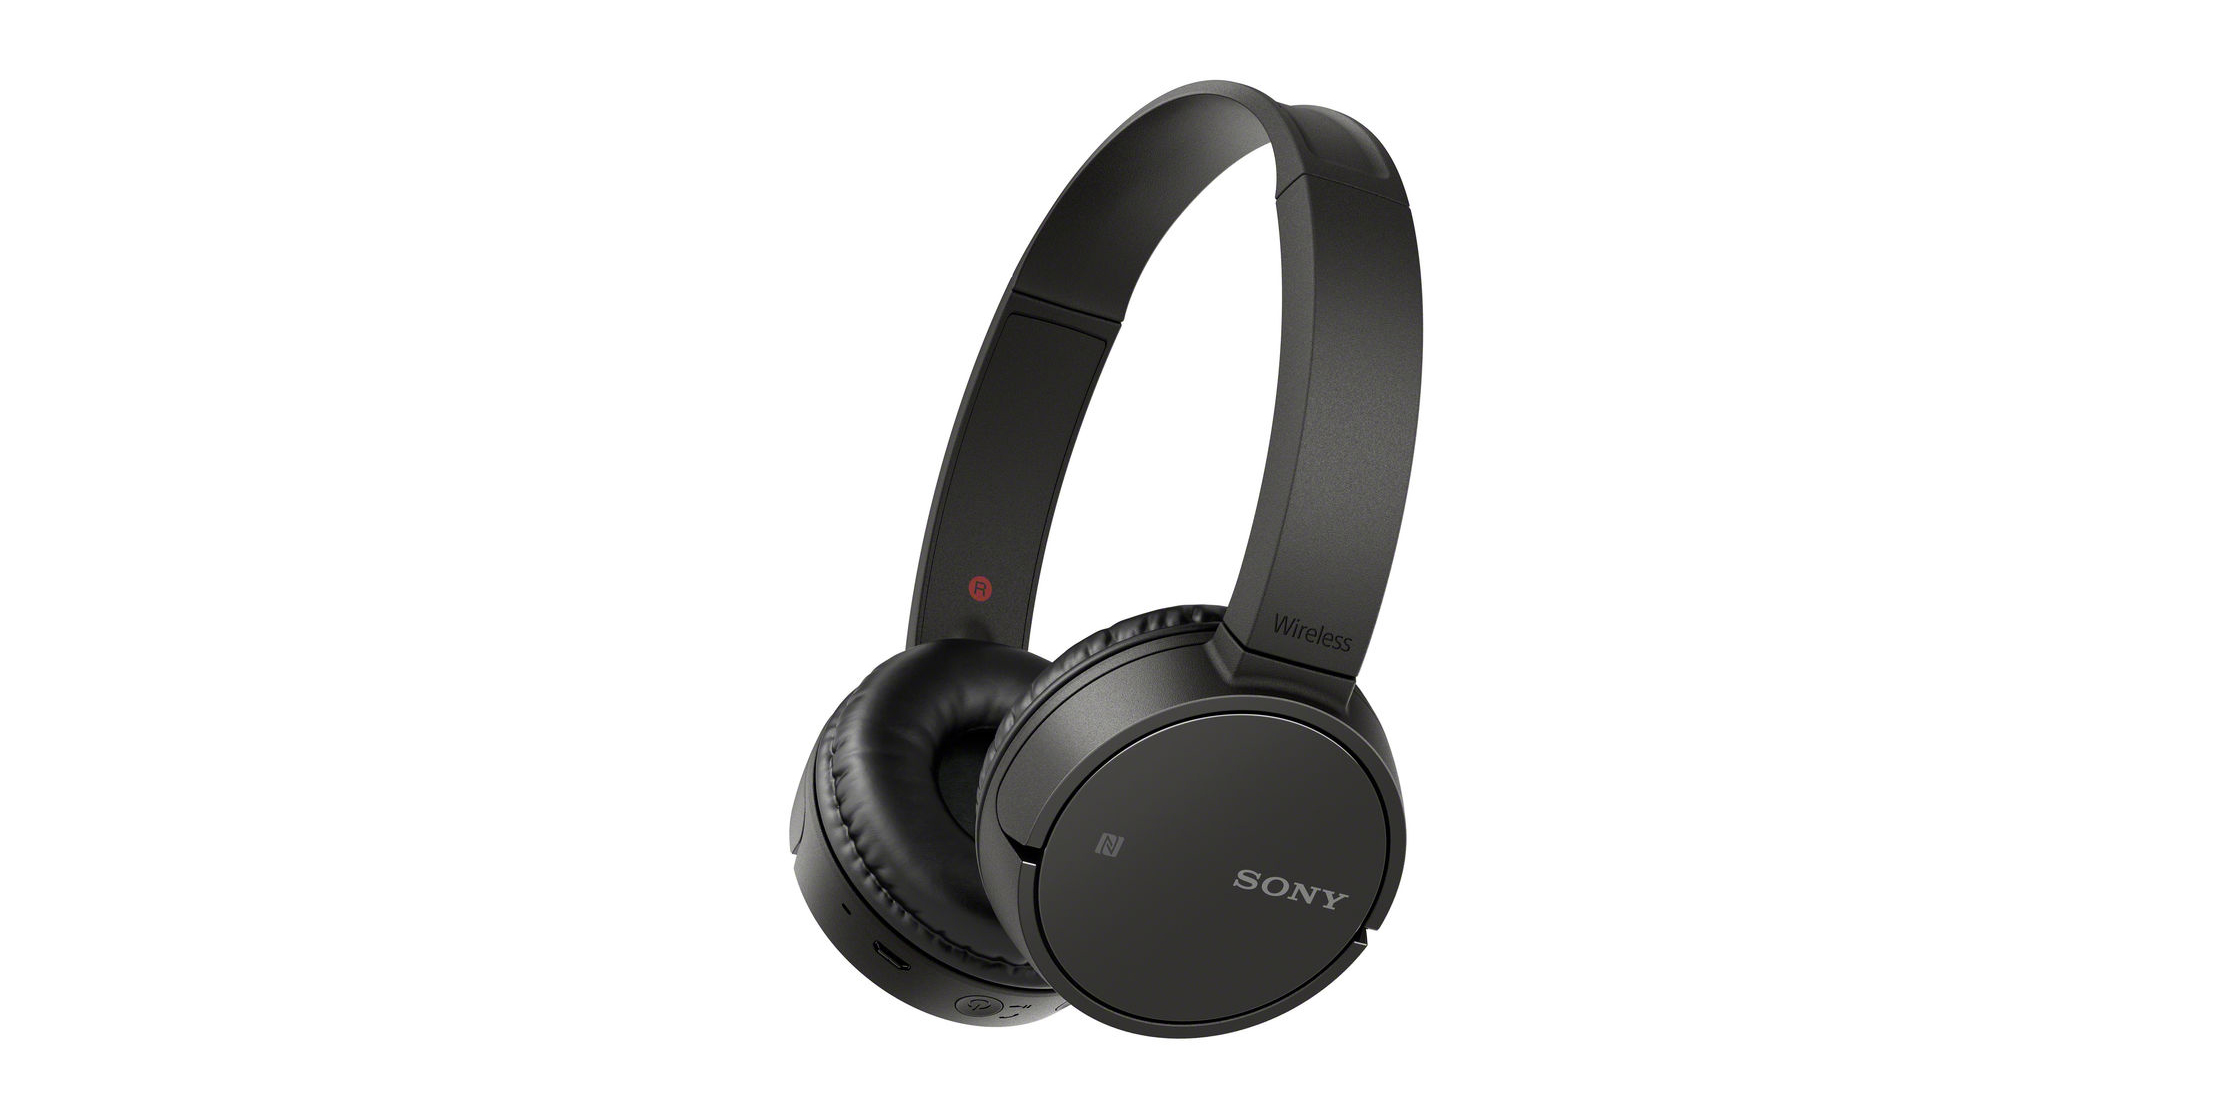 Sony's toprated Wireless Headphones down to 40, today only at Best